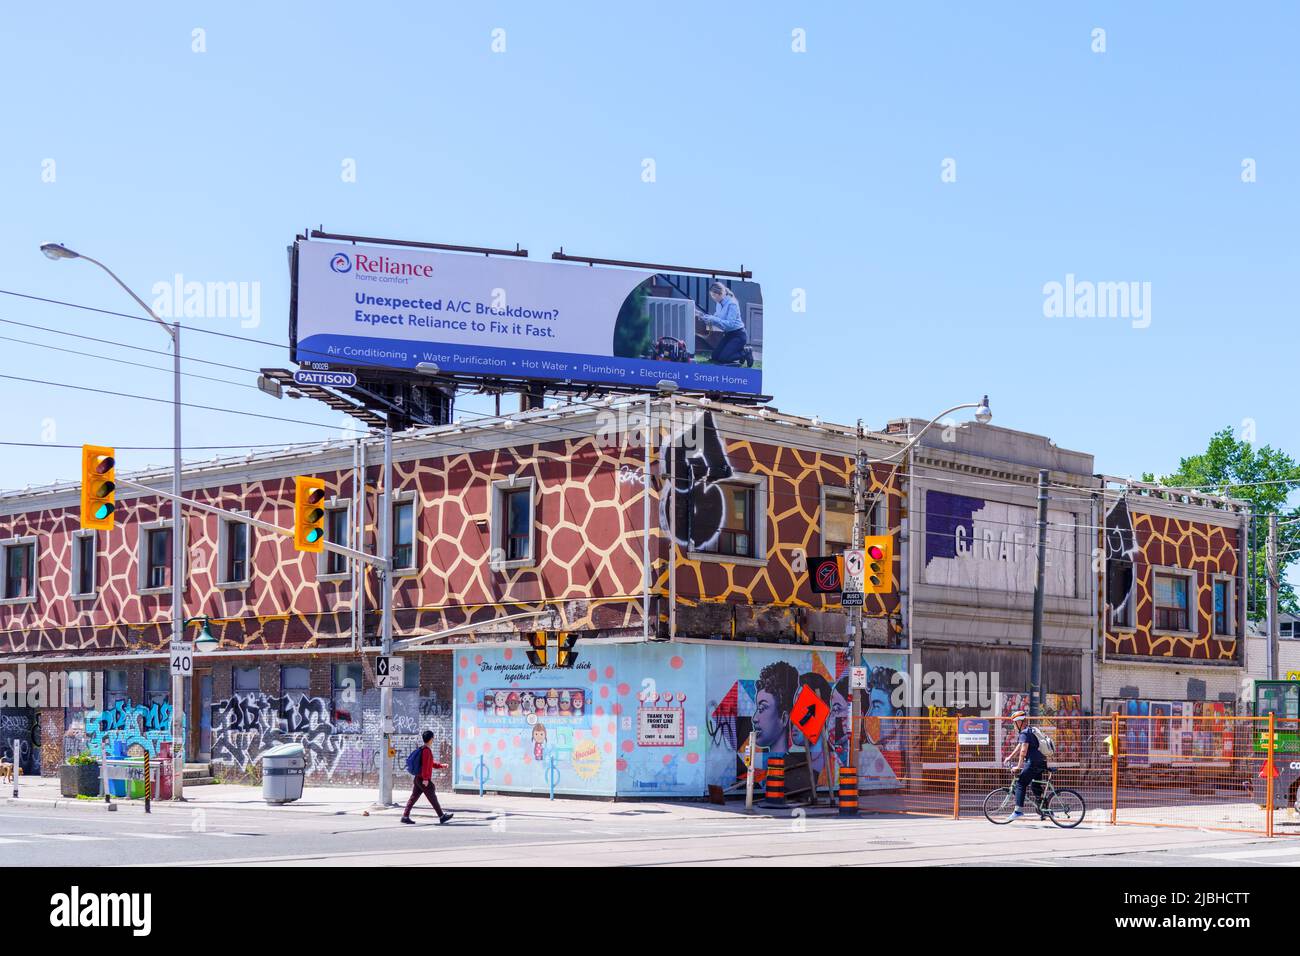 A Reliance billboard on top of a building with diverse art in the facade. Stock Photo